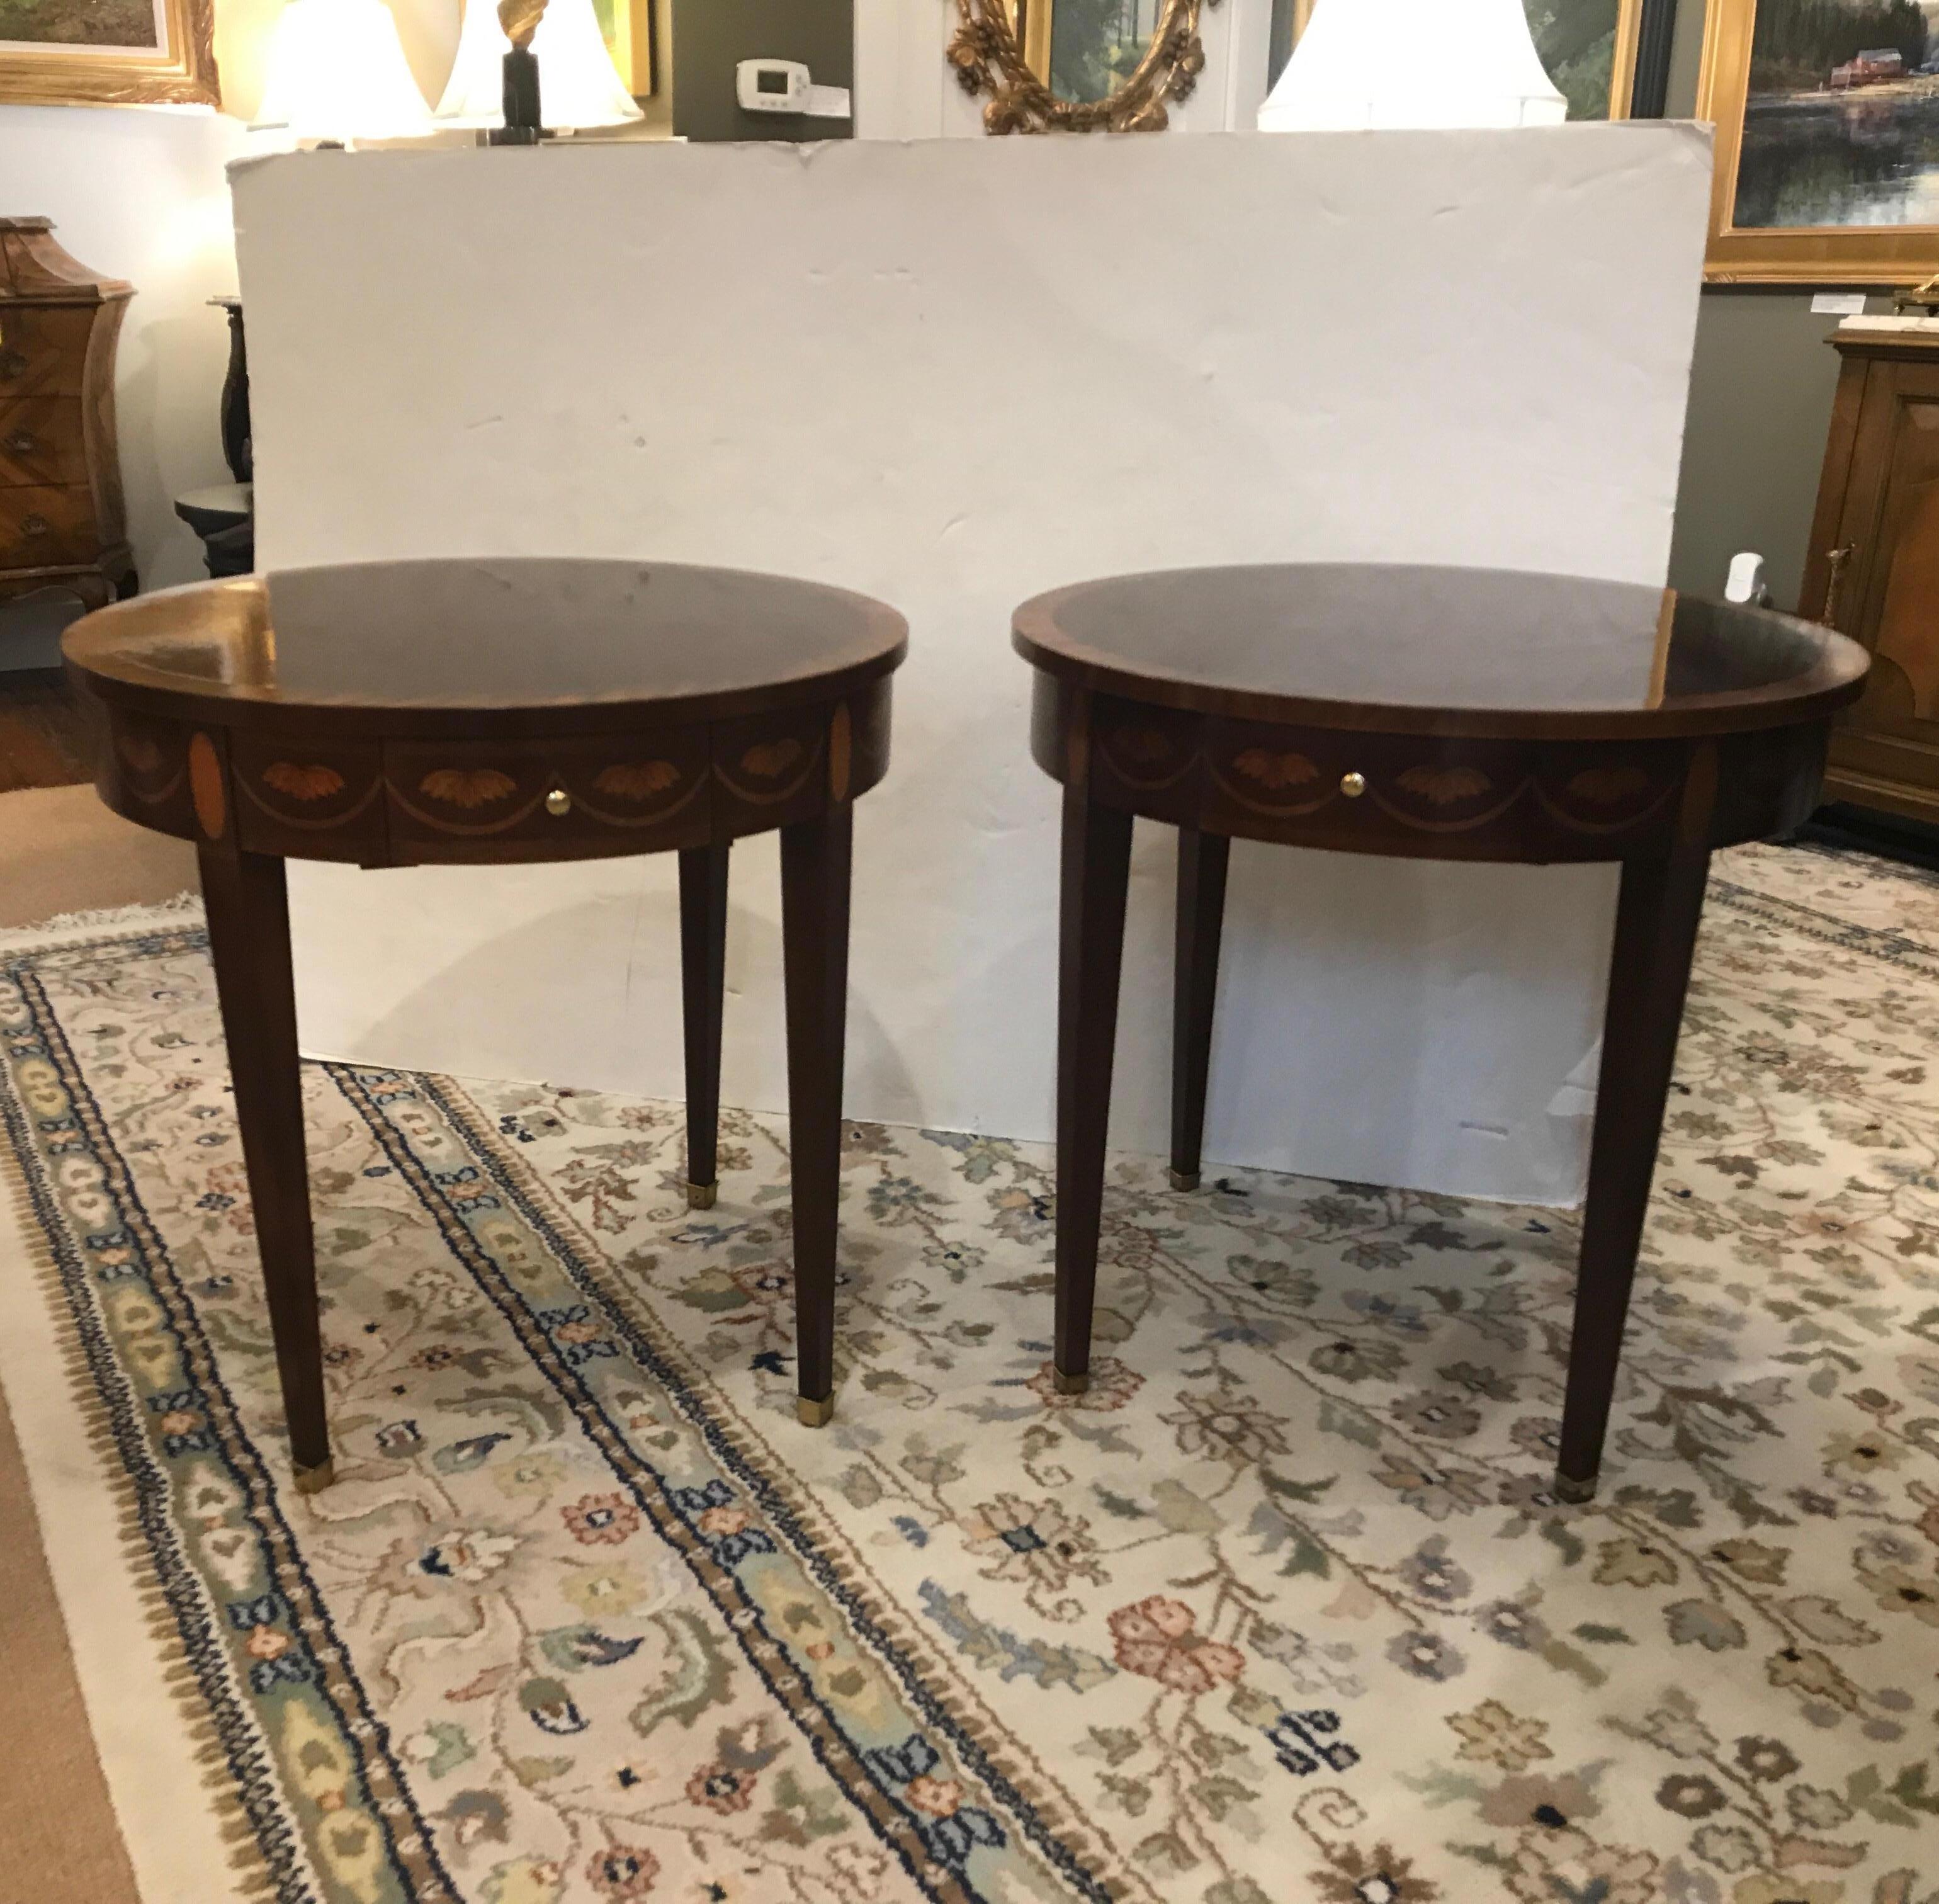 A pair of flame mahogany round side tables by Baker Furniture. The round tops with satinwood banding with side pullout / pull-out trays. The table with delicate inlay around the aprons and the top of the four tapering legs. Each one with a baker